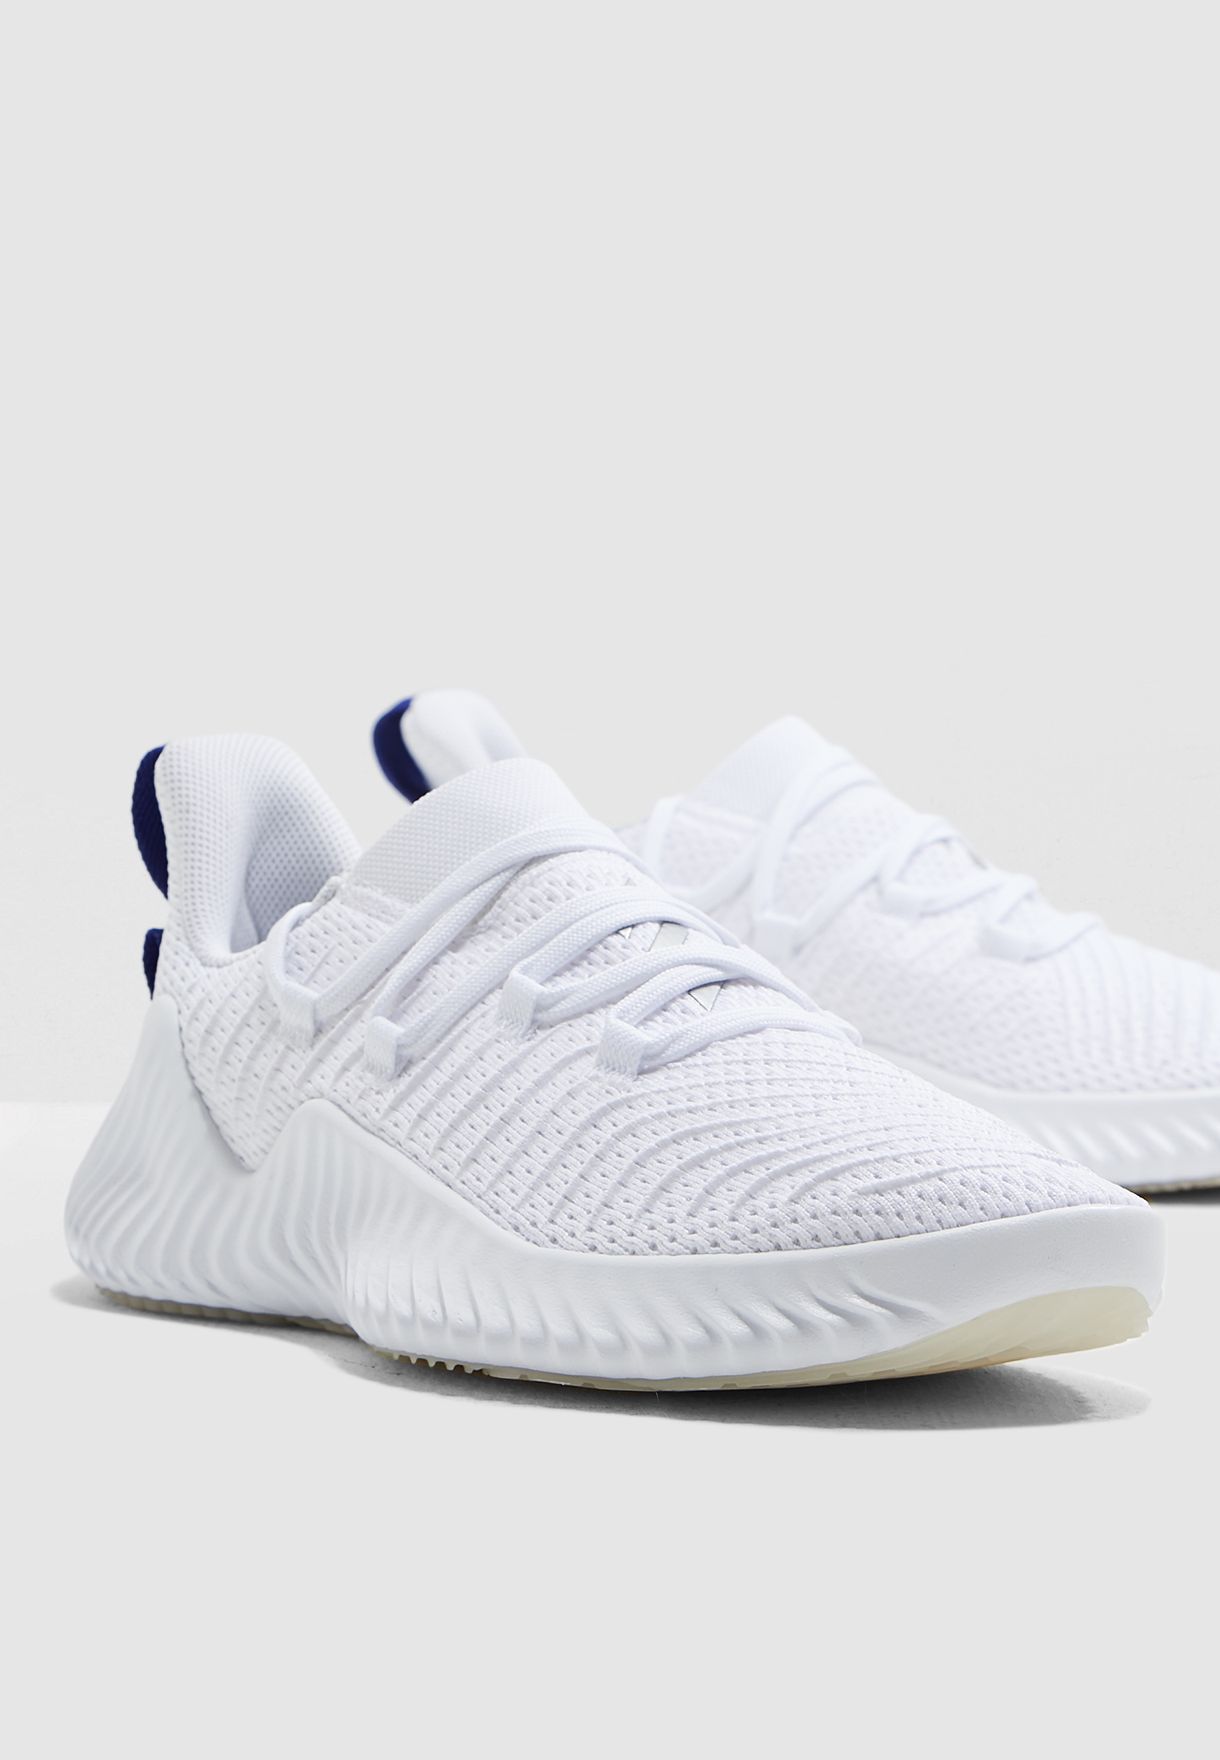 adidas alphabounce trainer white